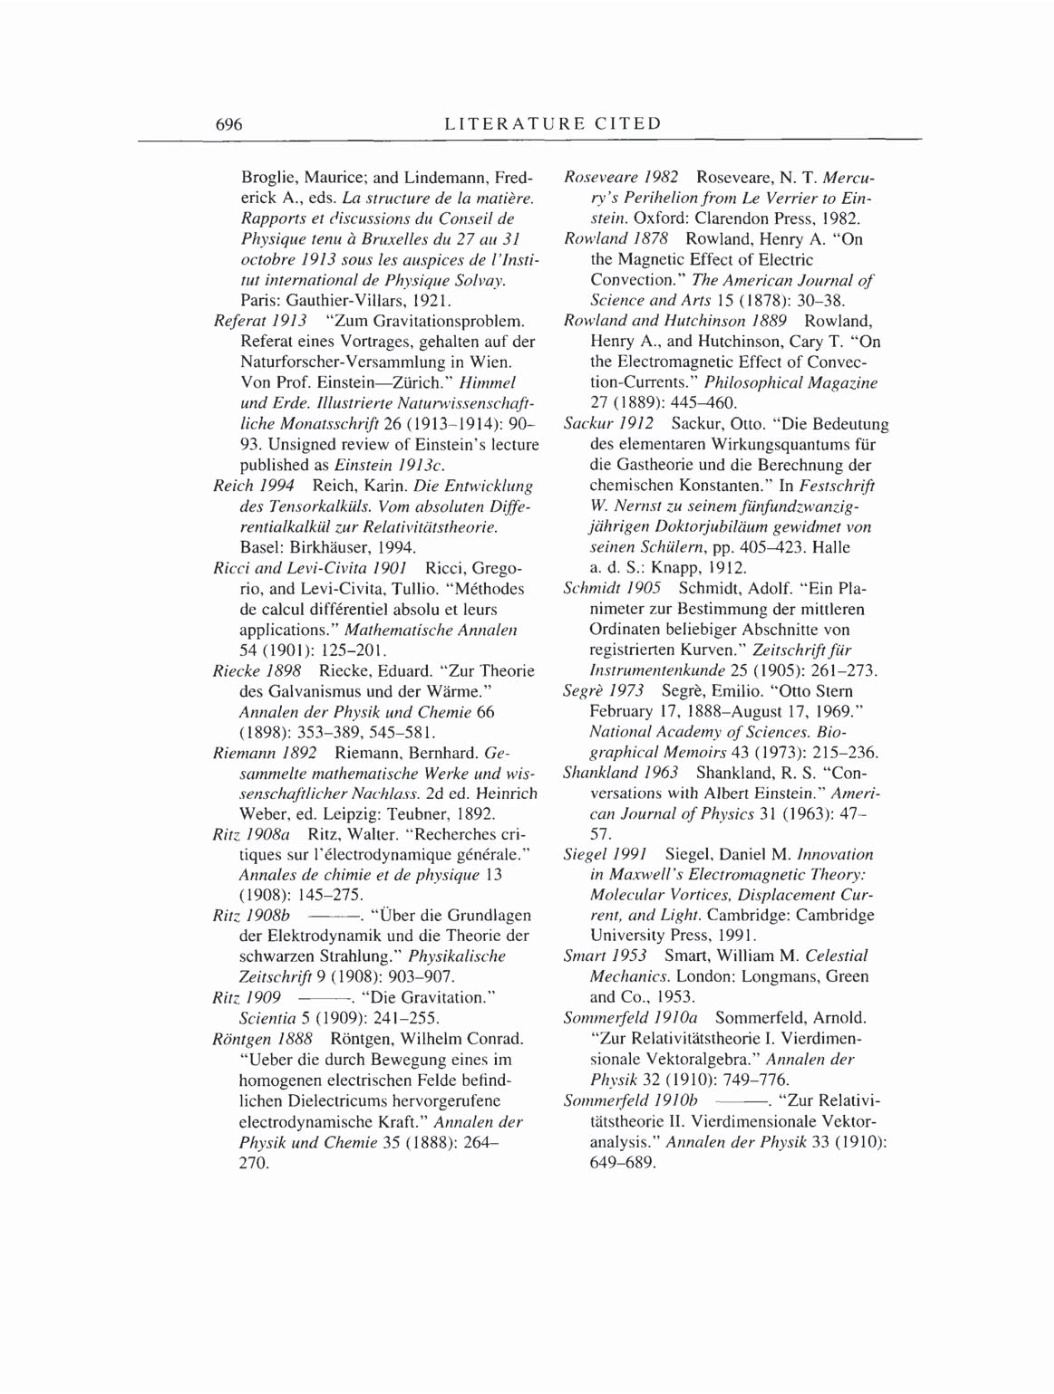 Volume 4: The Swiss Years: Writings 1912-1914 page 696